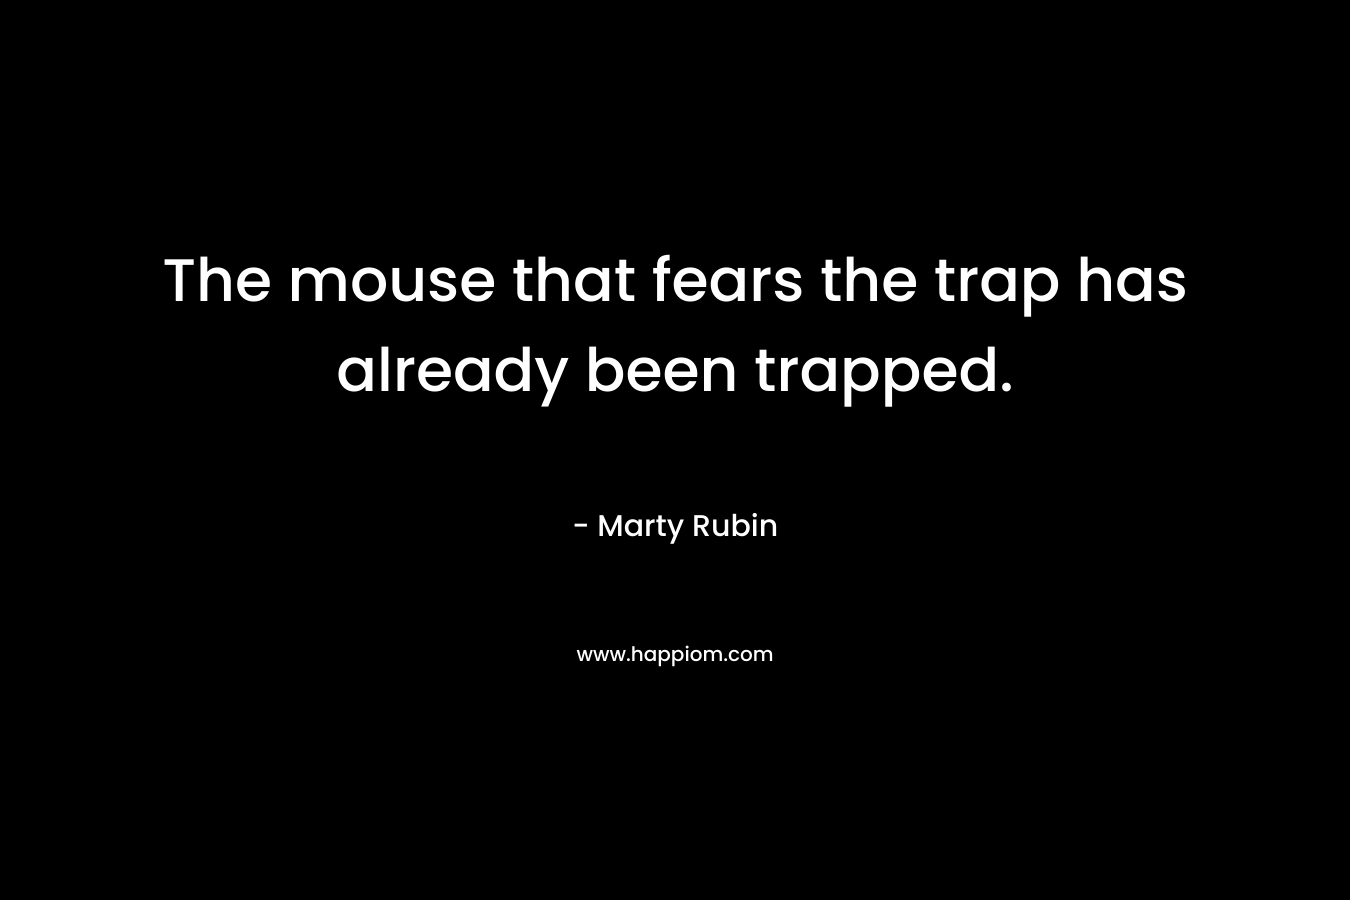 The mouse that fears the trap has already been trapped.